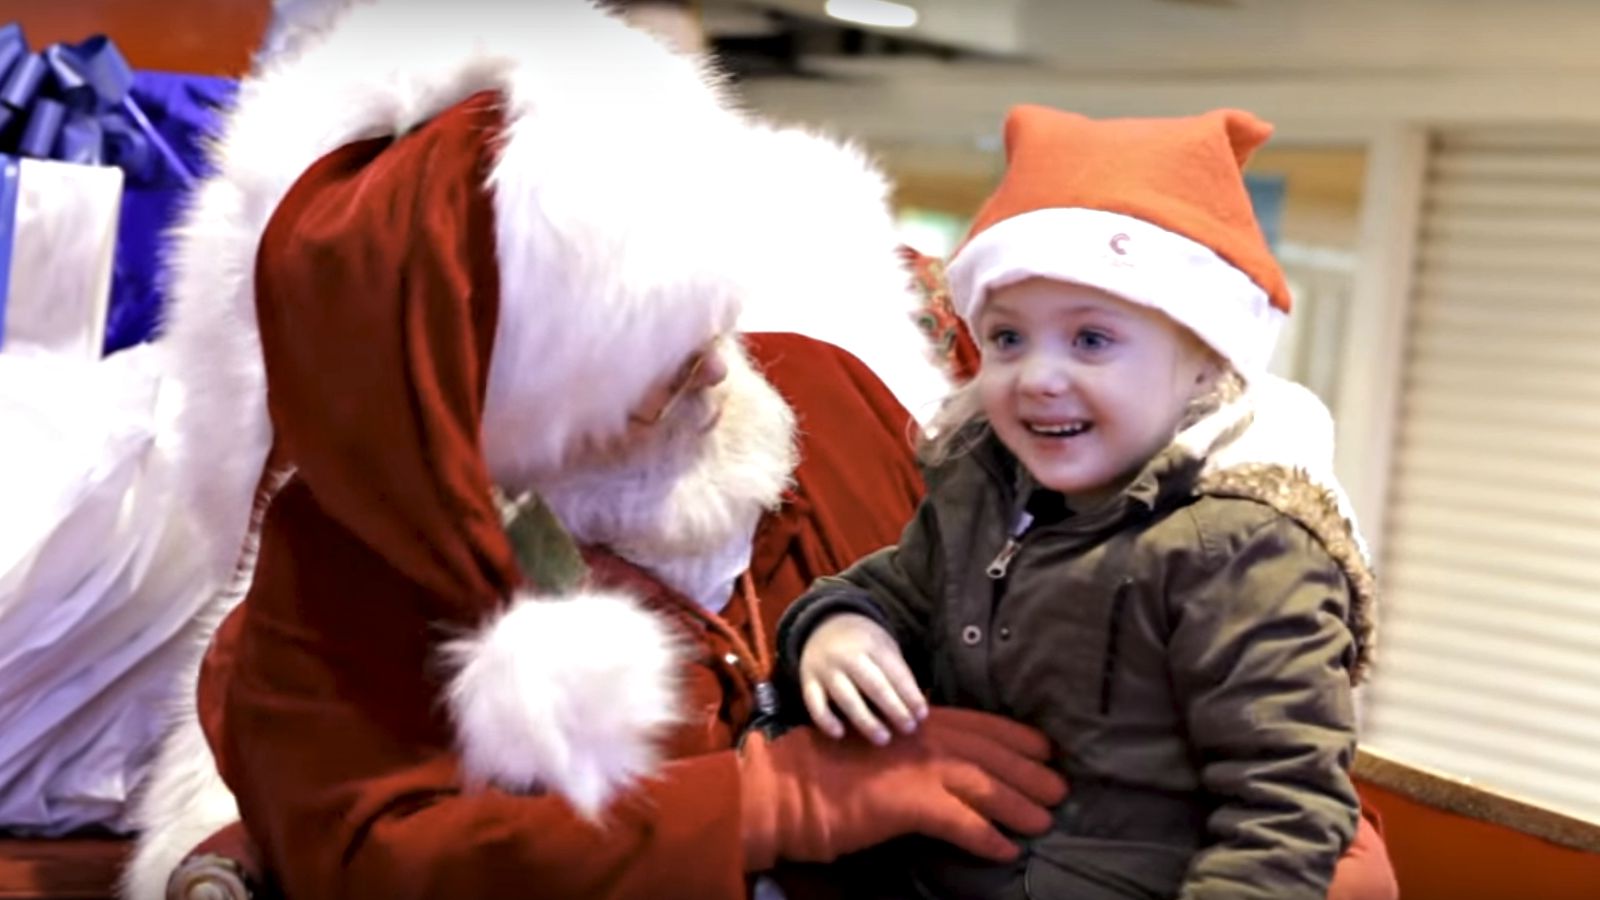 This Santa Signing with a Little Girl to Get Her Christmas Wish Will Melt Your Heart